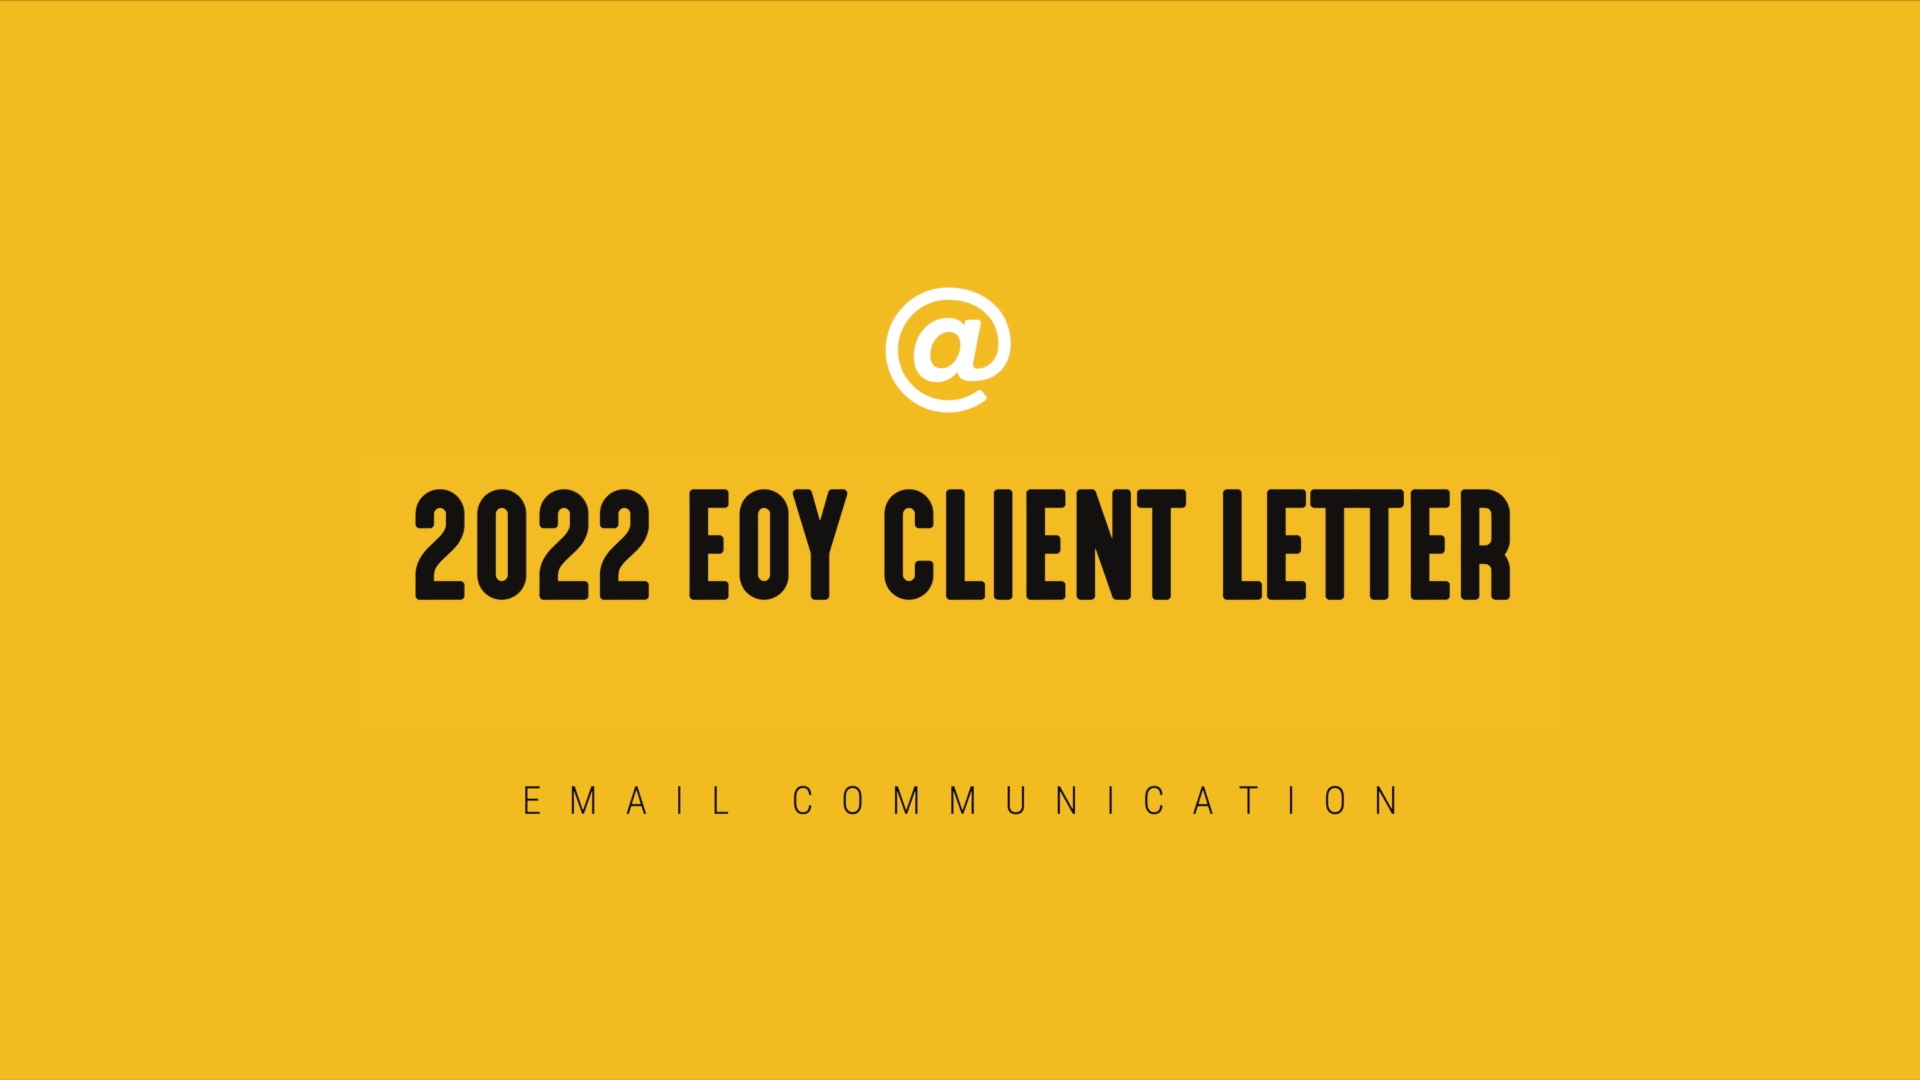 [NEW] 2022 EOY Client Letter - Timely Email